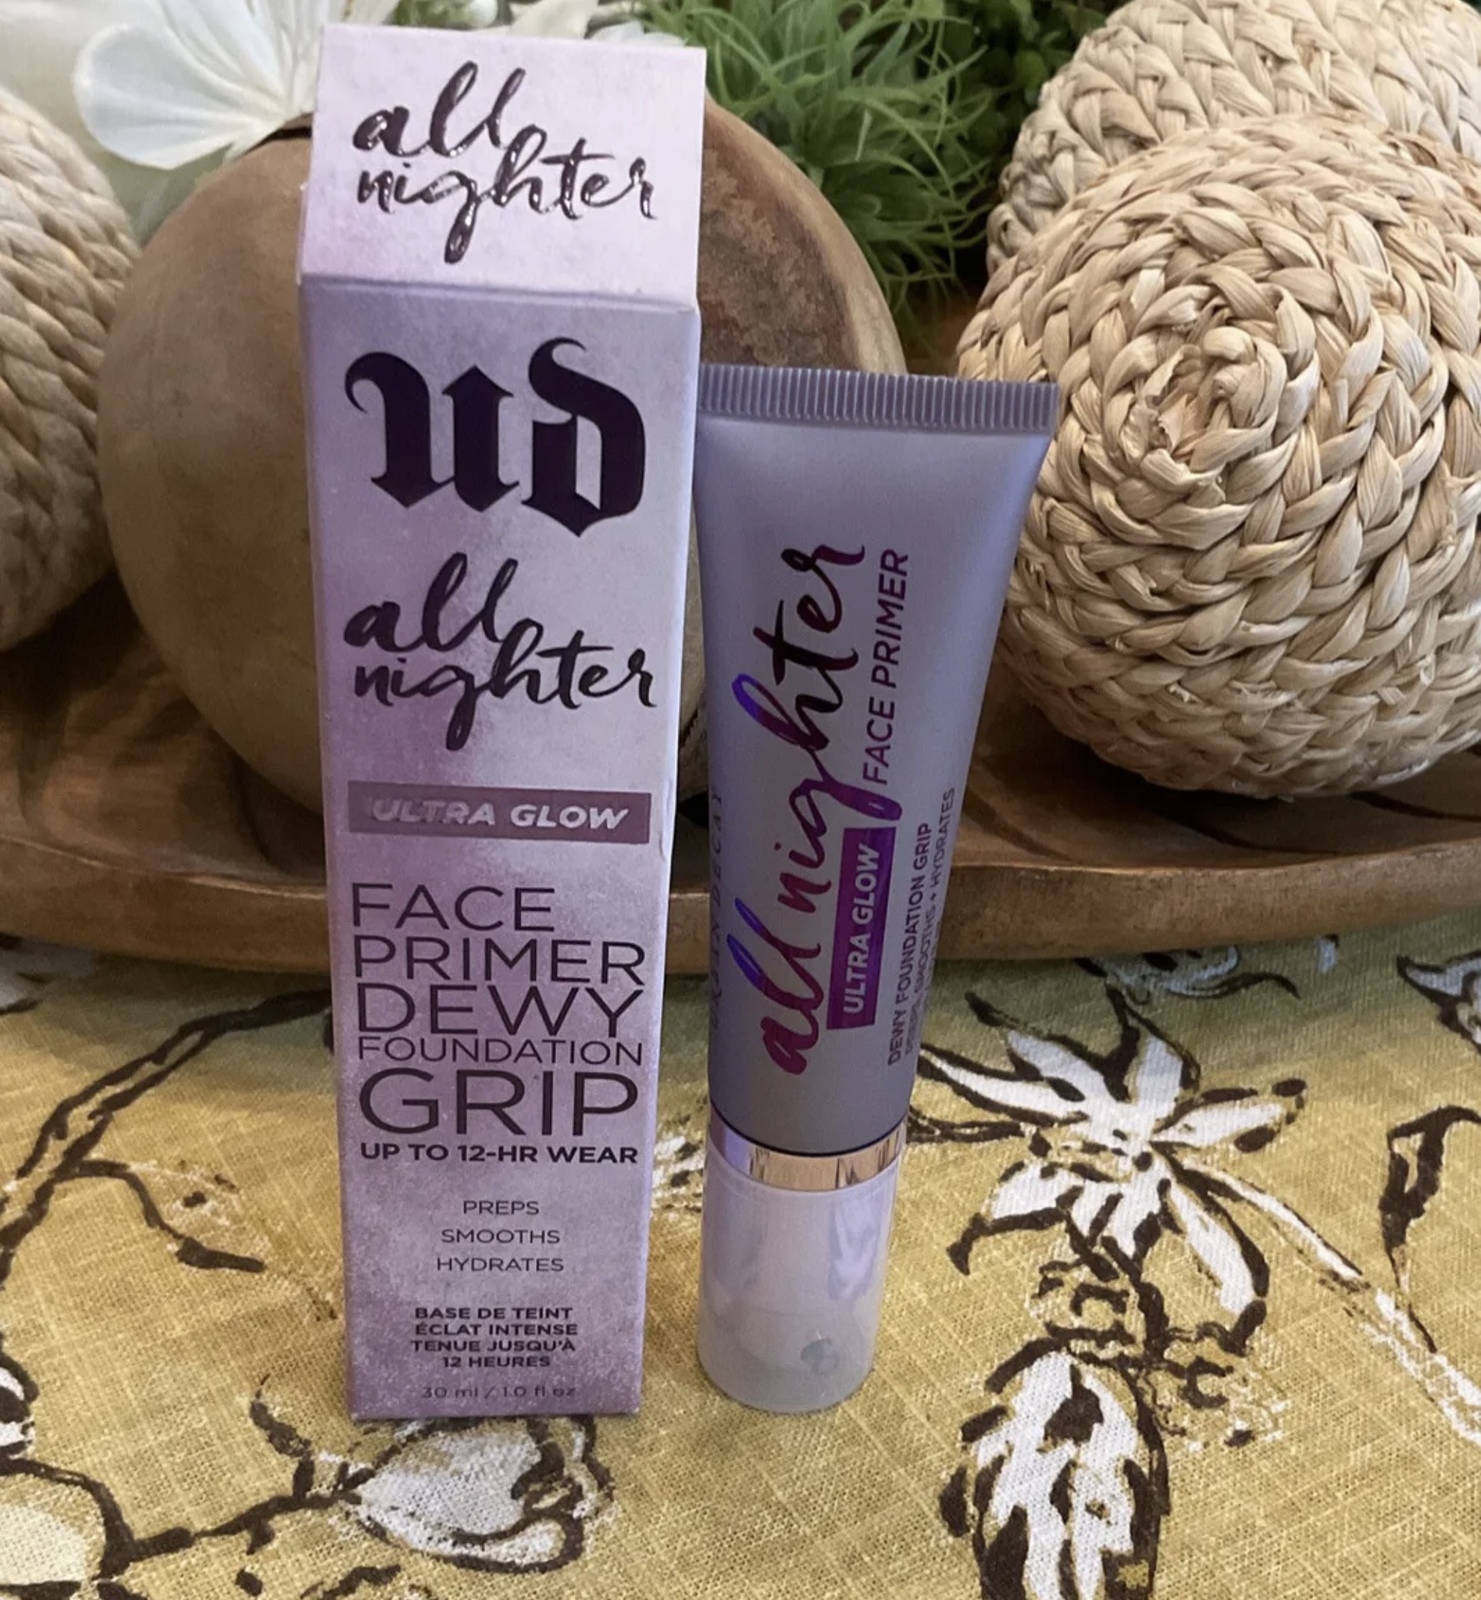 URBAN DECAY All Nighter Ultra Glow Face Primer 1oz/30ml Authentic - $22.00